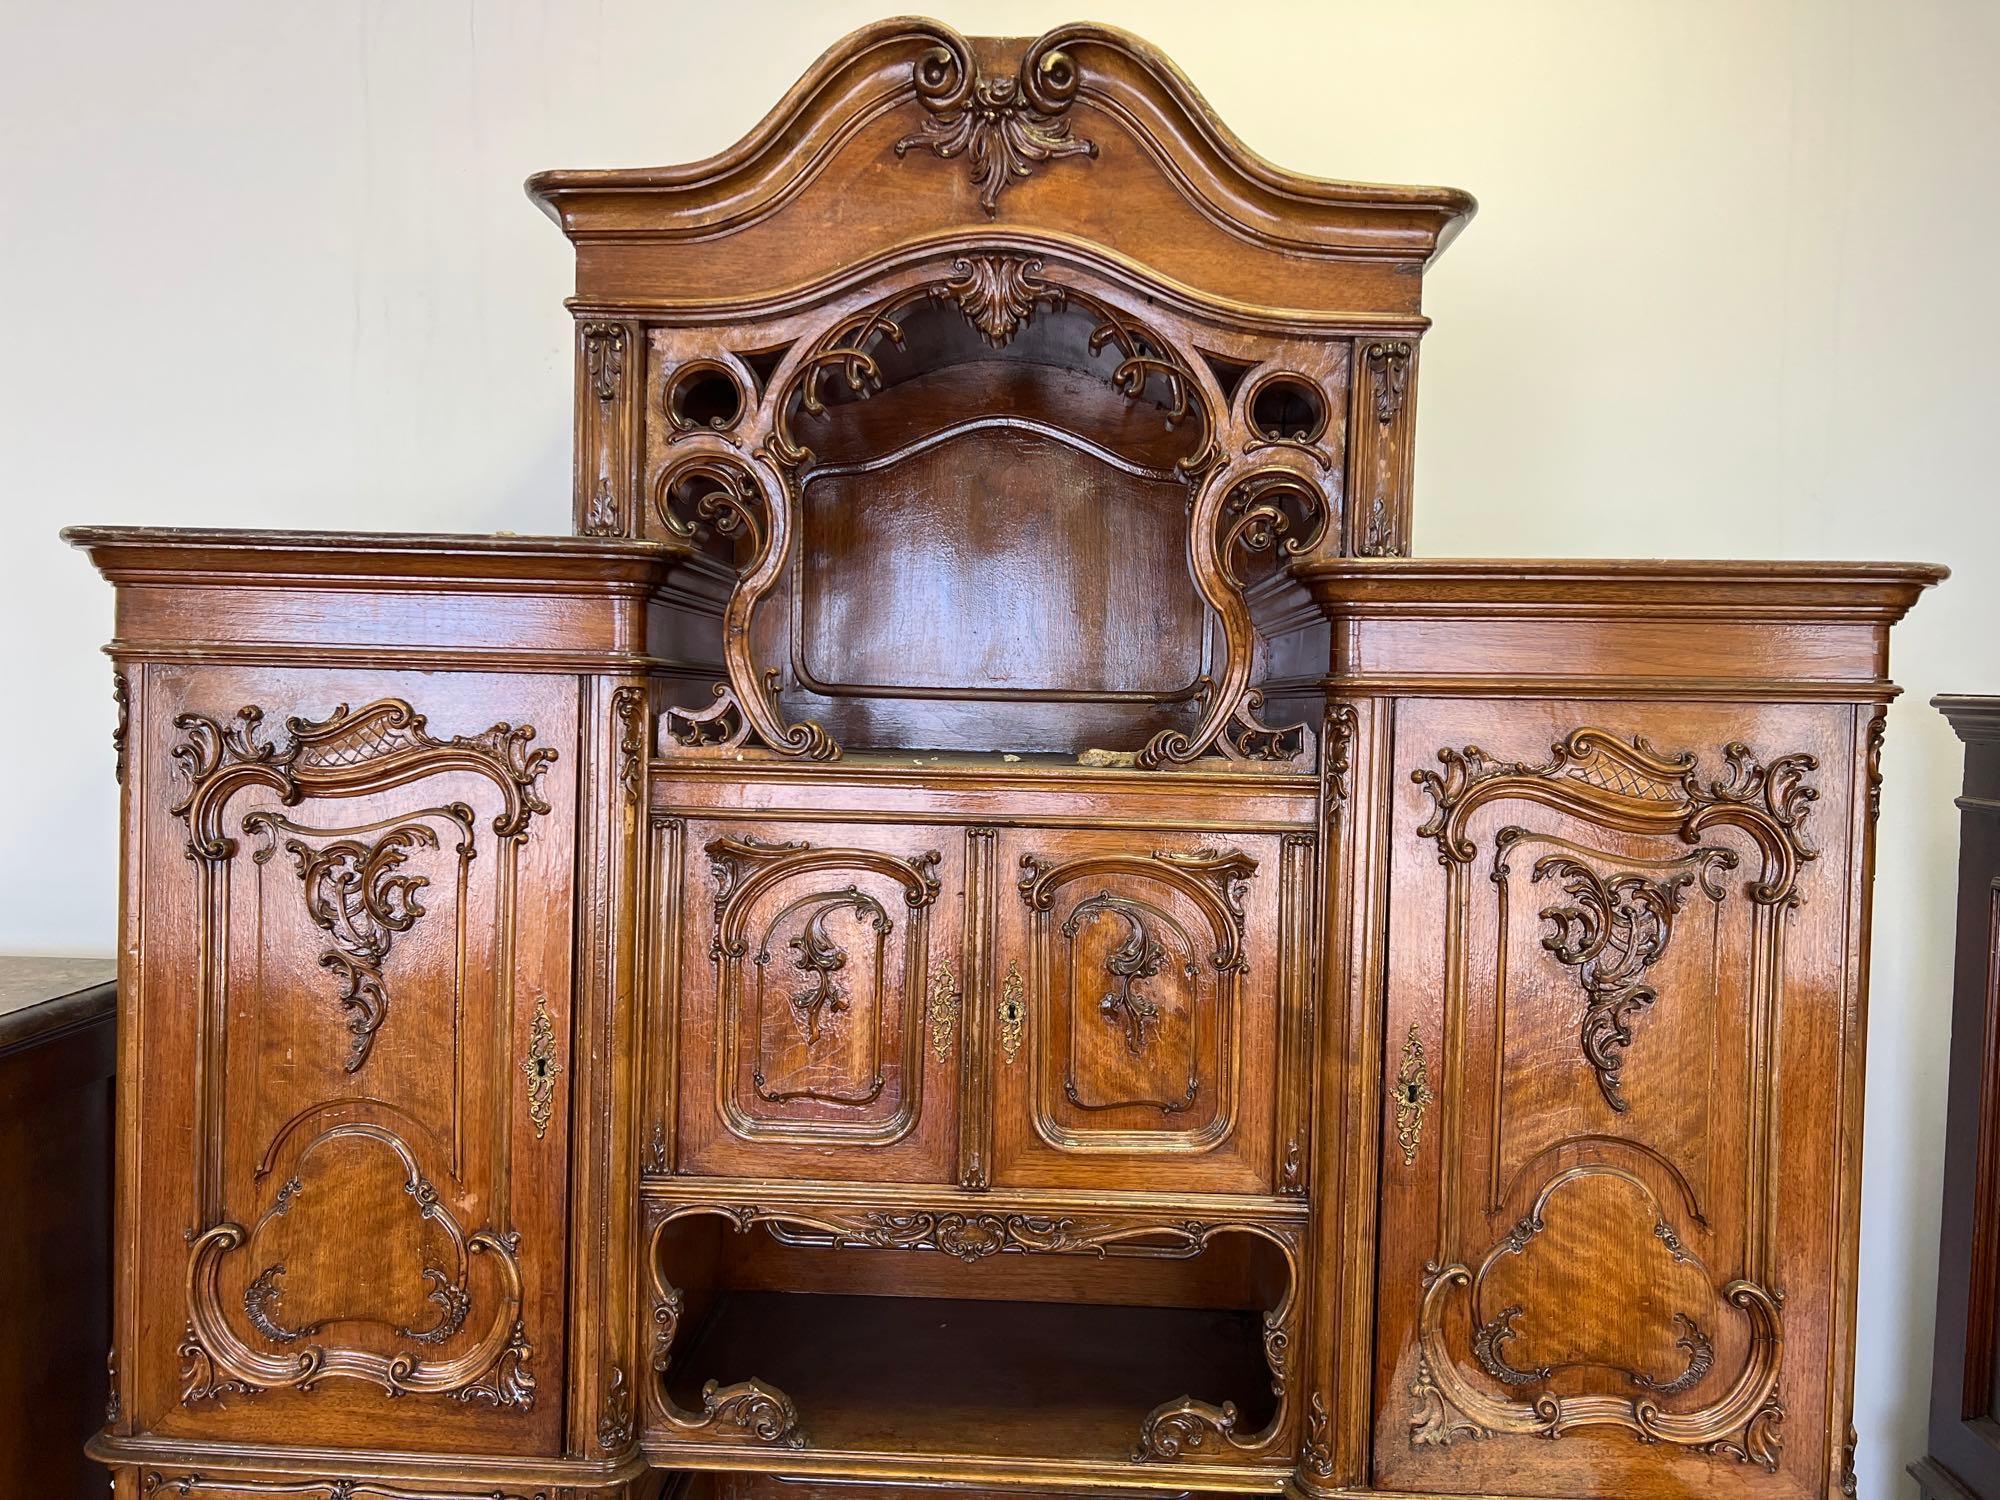 Very Ornate 1880s Austrian Walnut Hutch with Black Marble and Serving Tray